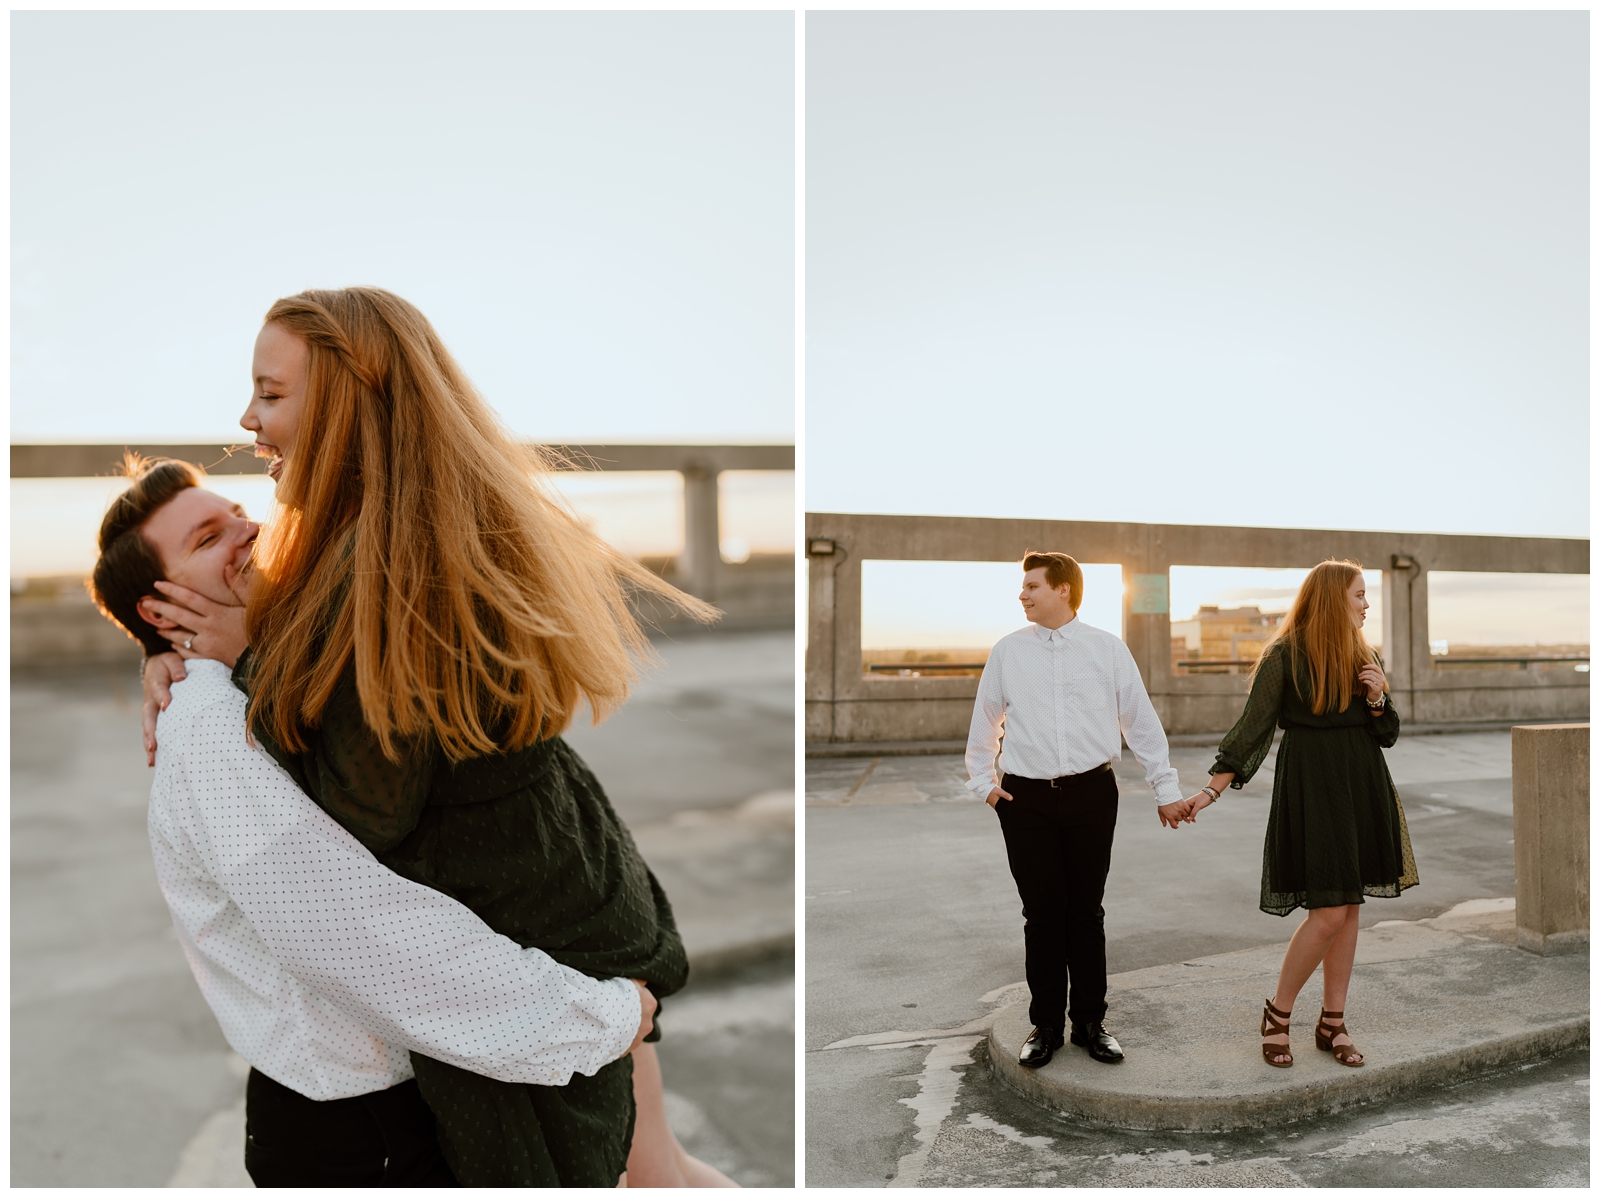 Golden hour light during fun and urban downtown Greensboro NC engagement session by North Carolina wedding and elopement photographer